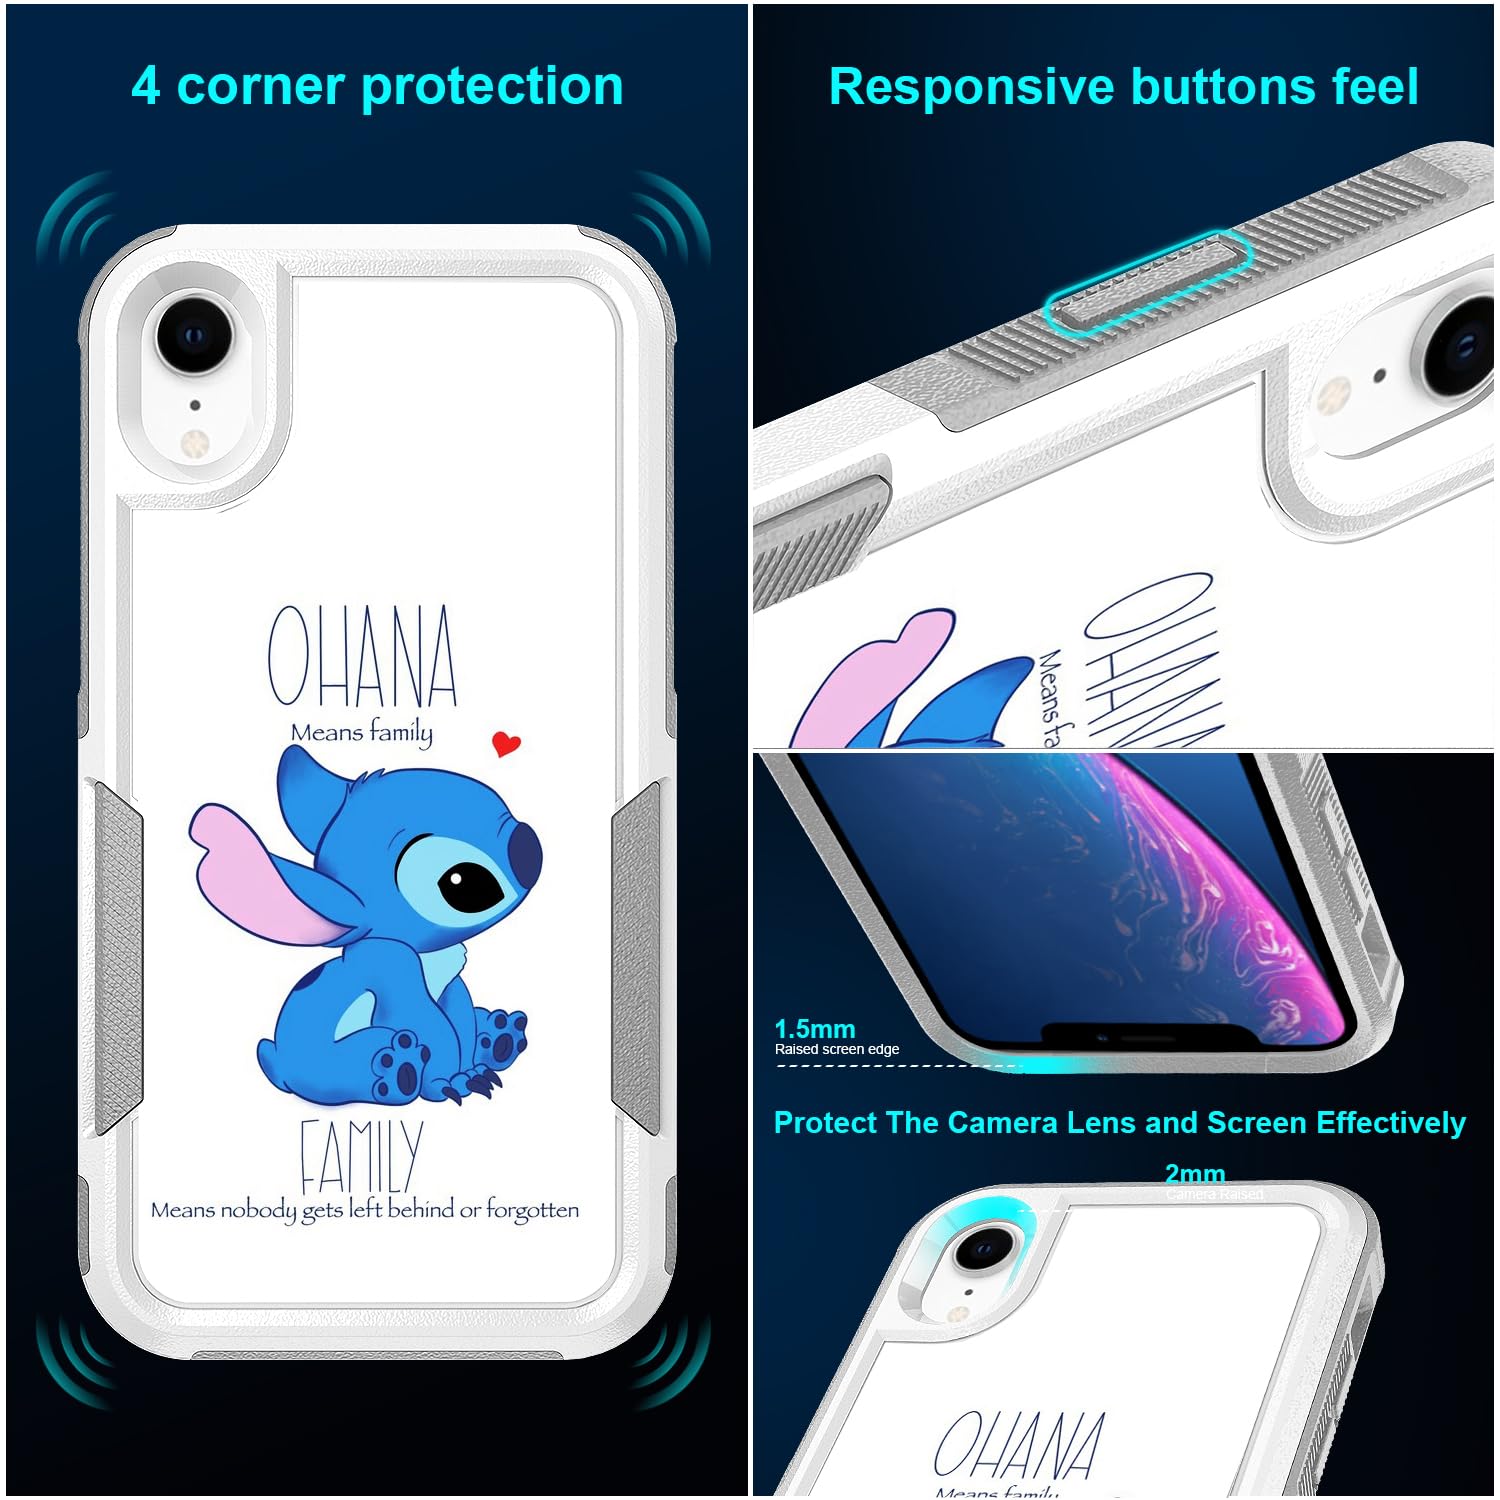 Candykisscase Case for iPhone Xs, Stitch Ohana Means Family Pattern Shock-Absorption Hard PC and Inner Silicone Hybrid Dual Layer Armor Defender Case Protective Cover for Apple iPhone X and iPhone Xs